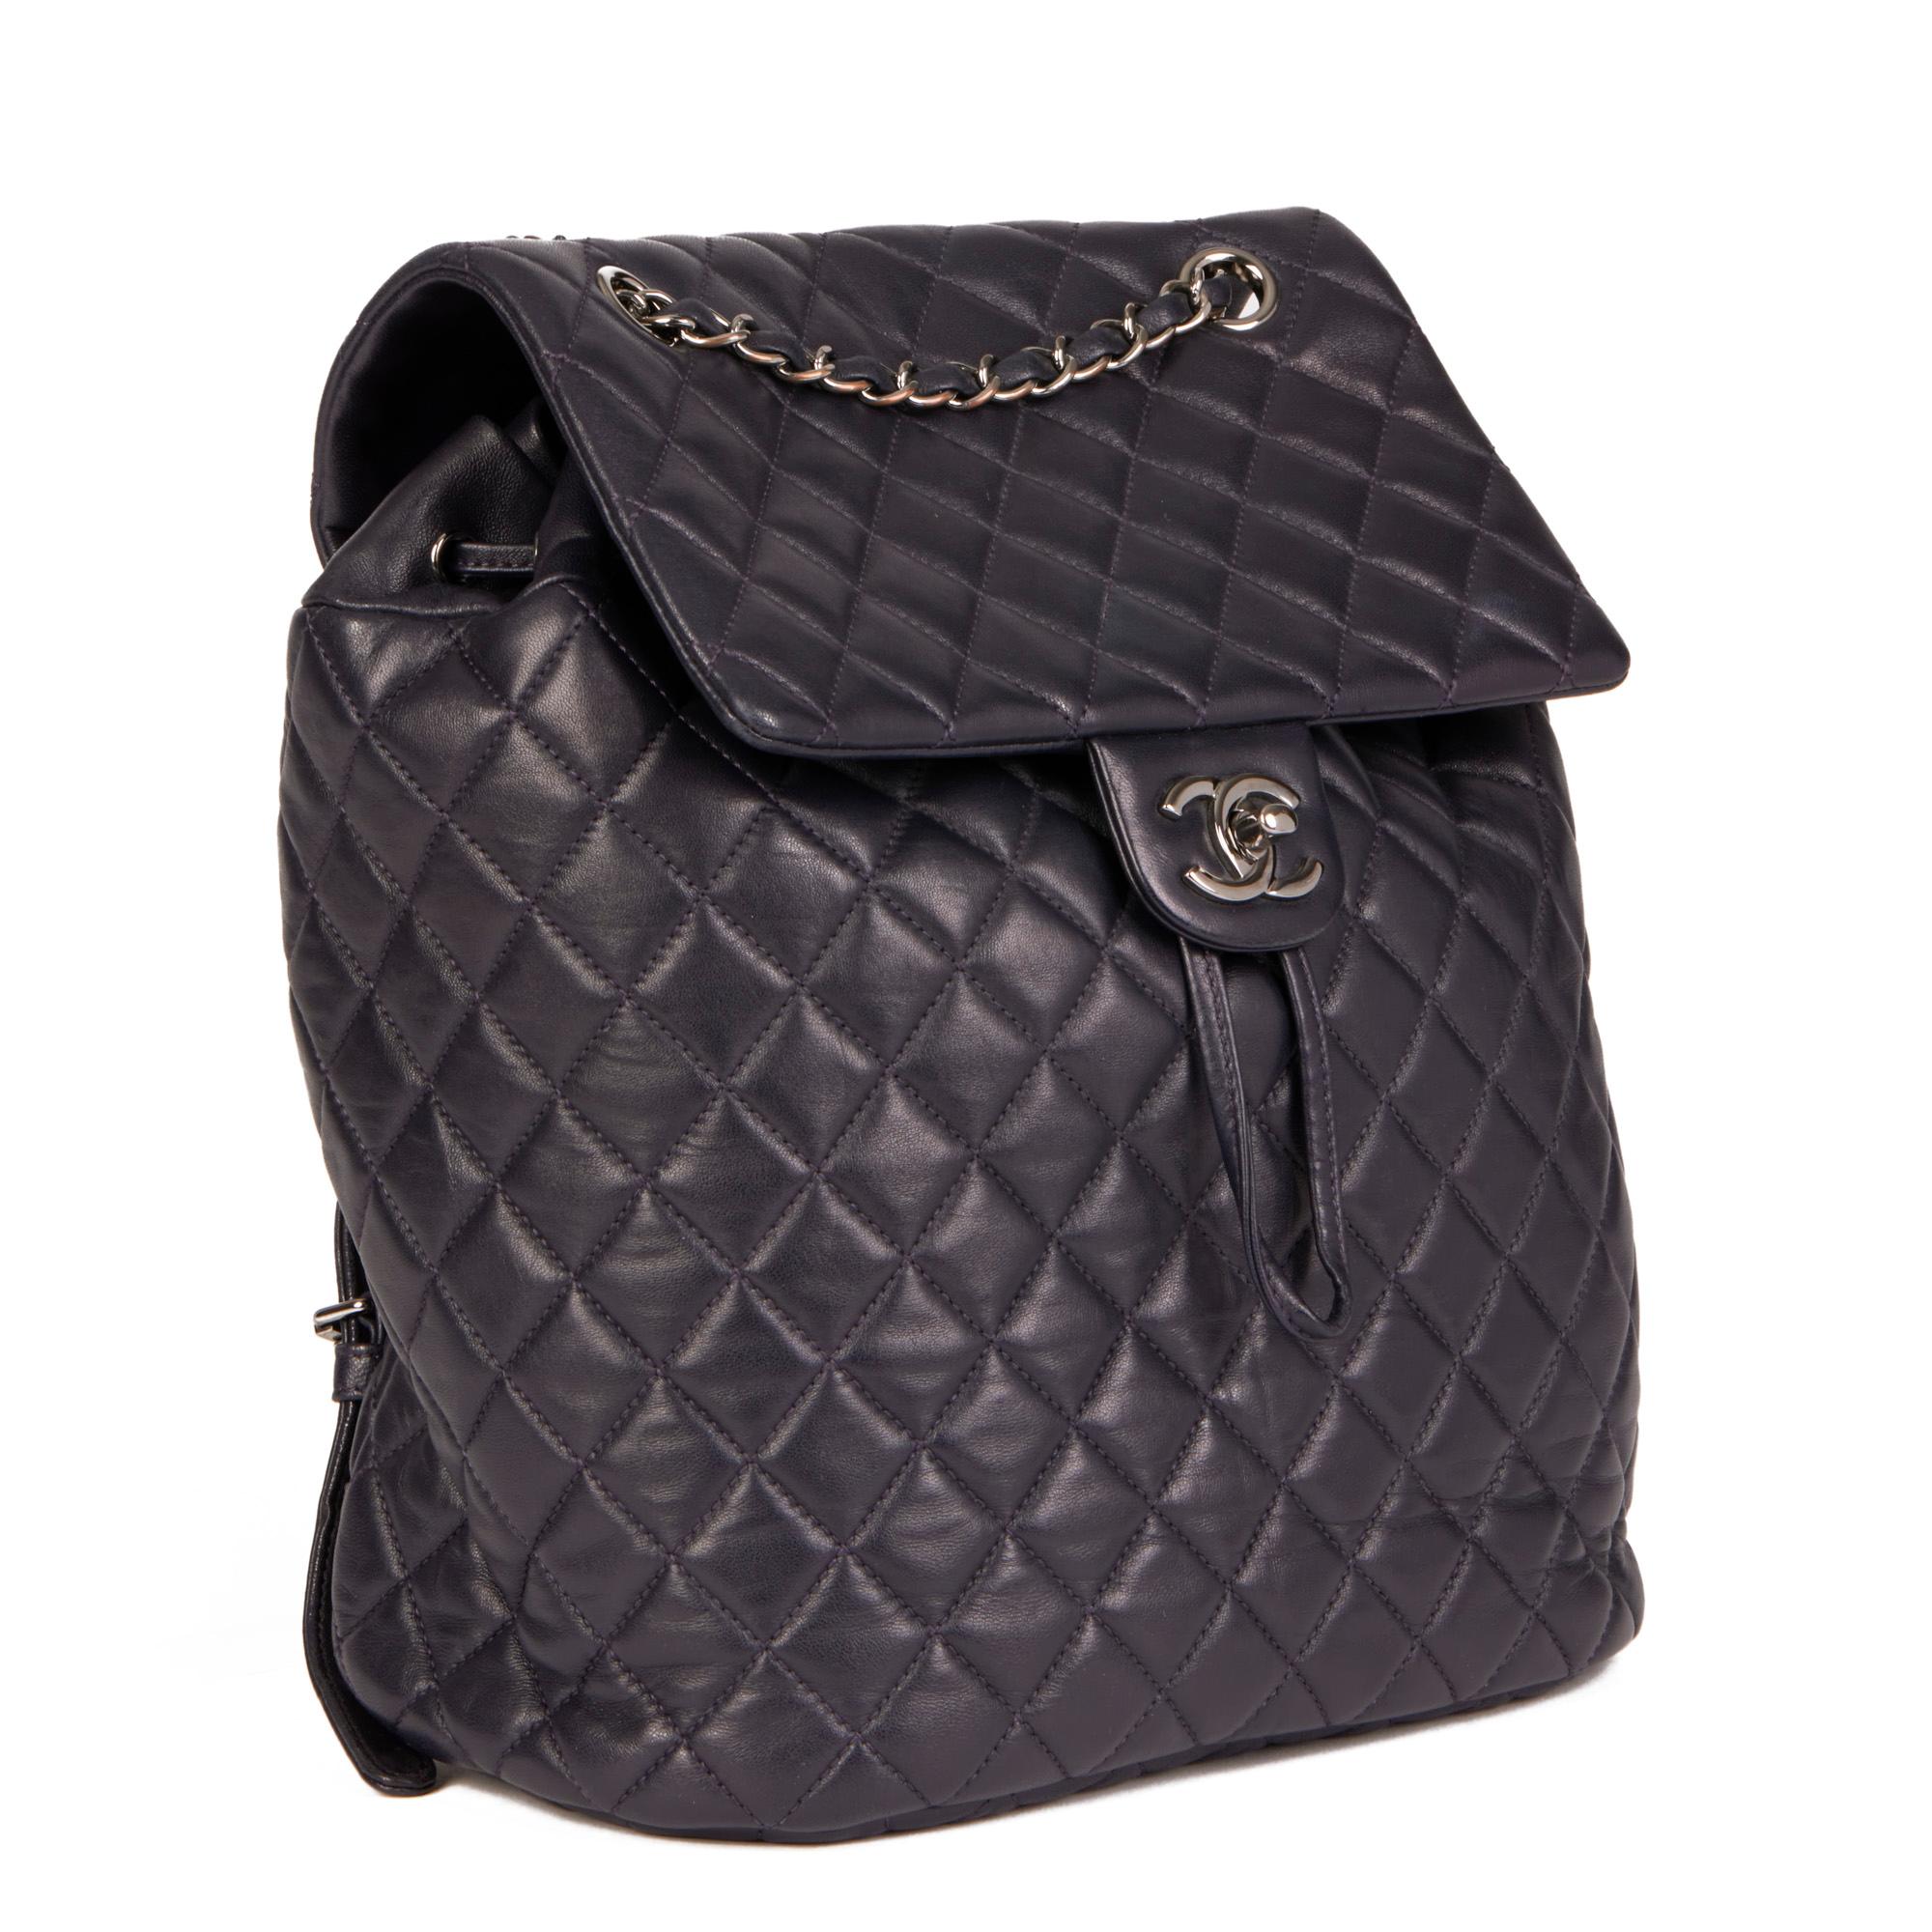 CHANEL
Indigo Quilted Lambskin Large Urban Spirit Backpack

Xupes Reference: HB4346
Serial Number: 23401474
Age (Circa): 2017
Accompanied By: Chanel Dust Bag, Authenticity Card
Authenticity Details: Authenticity Card, Serial Sticker (Made in